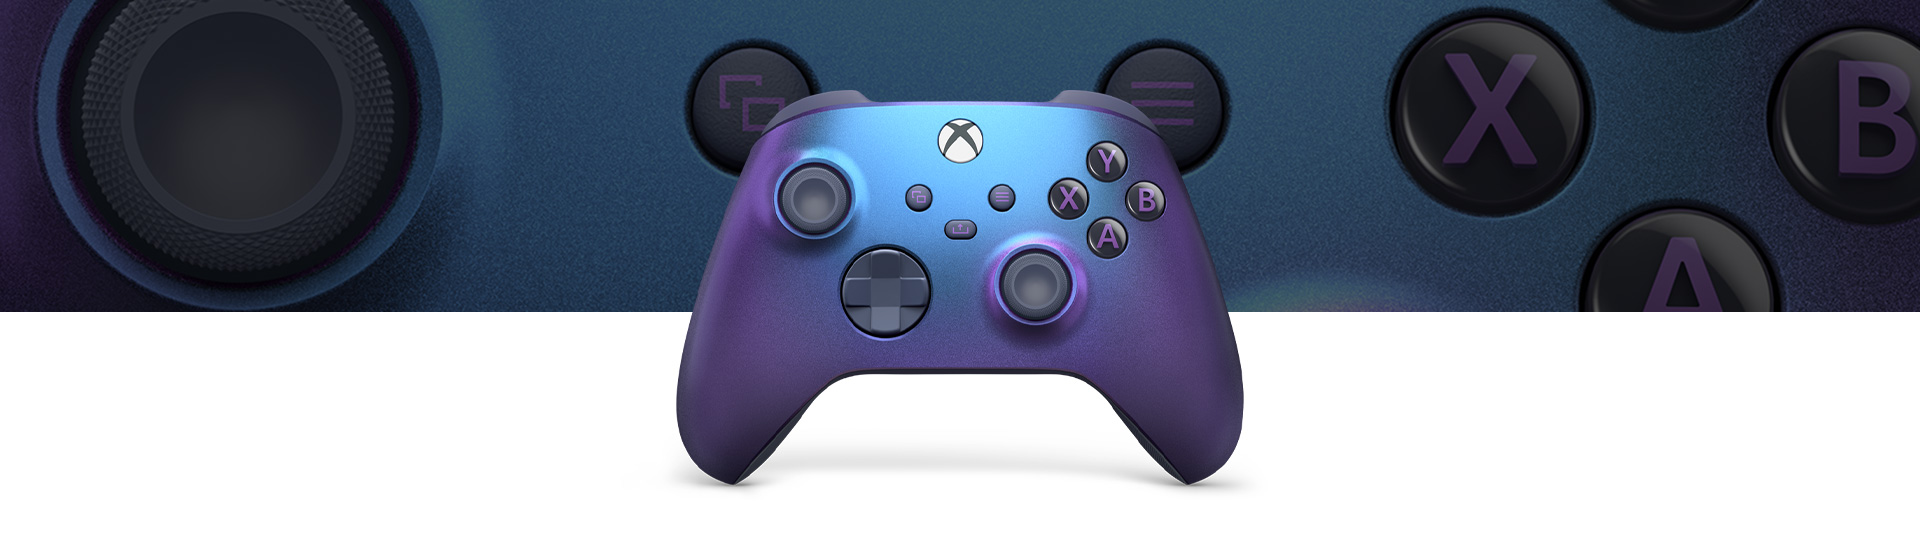 Front view of Xbox Wireless Controller – Stellar Shift Special Edition with close-up view in the background.